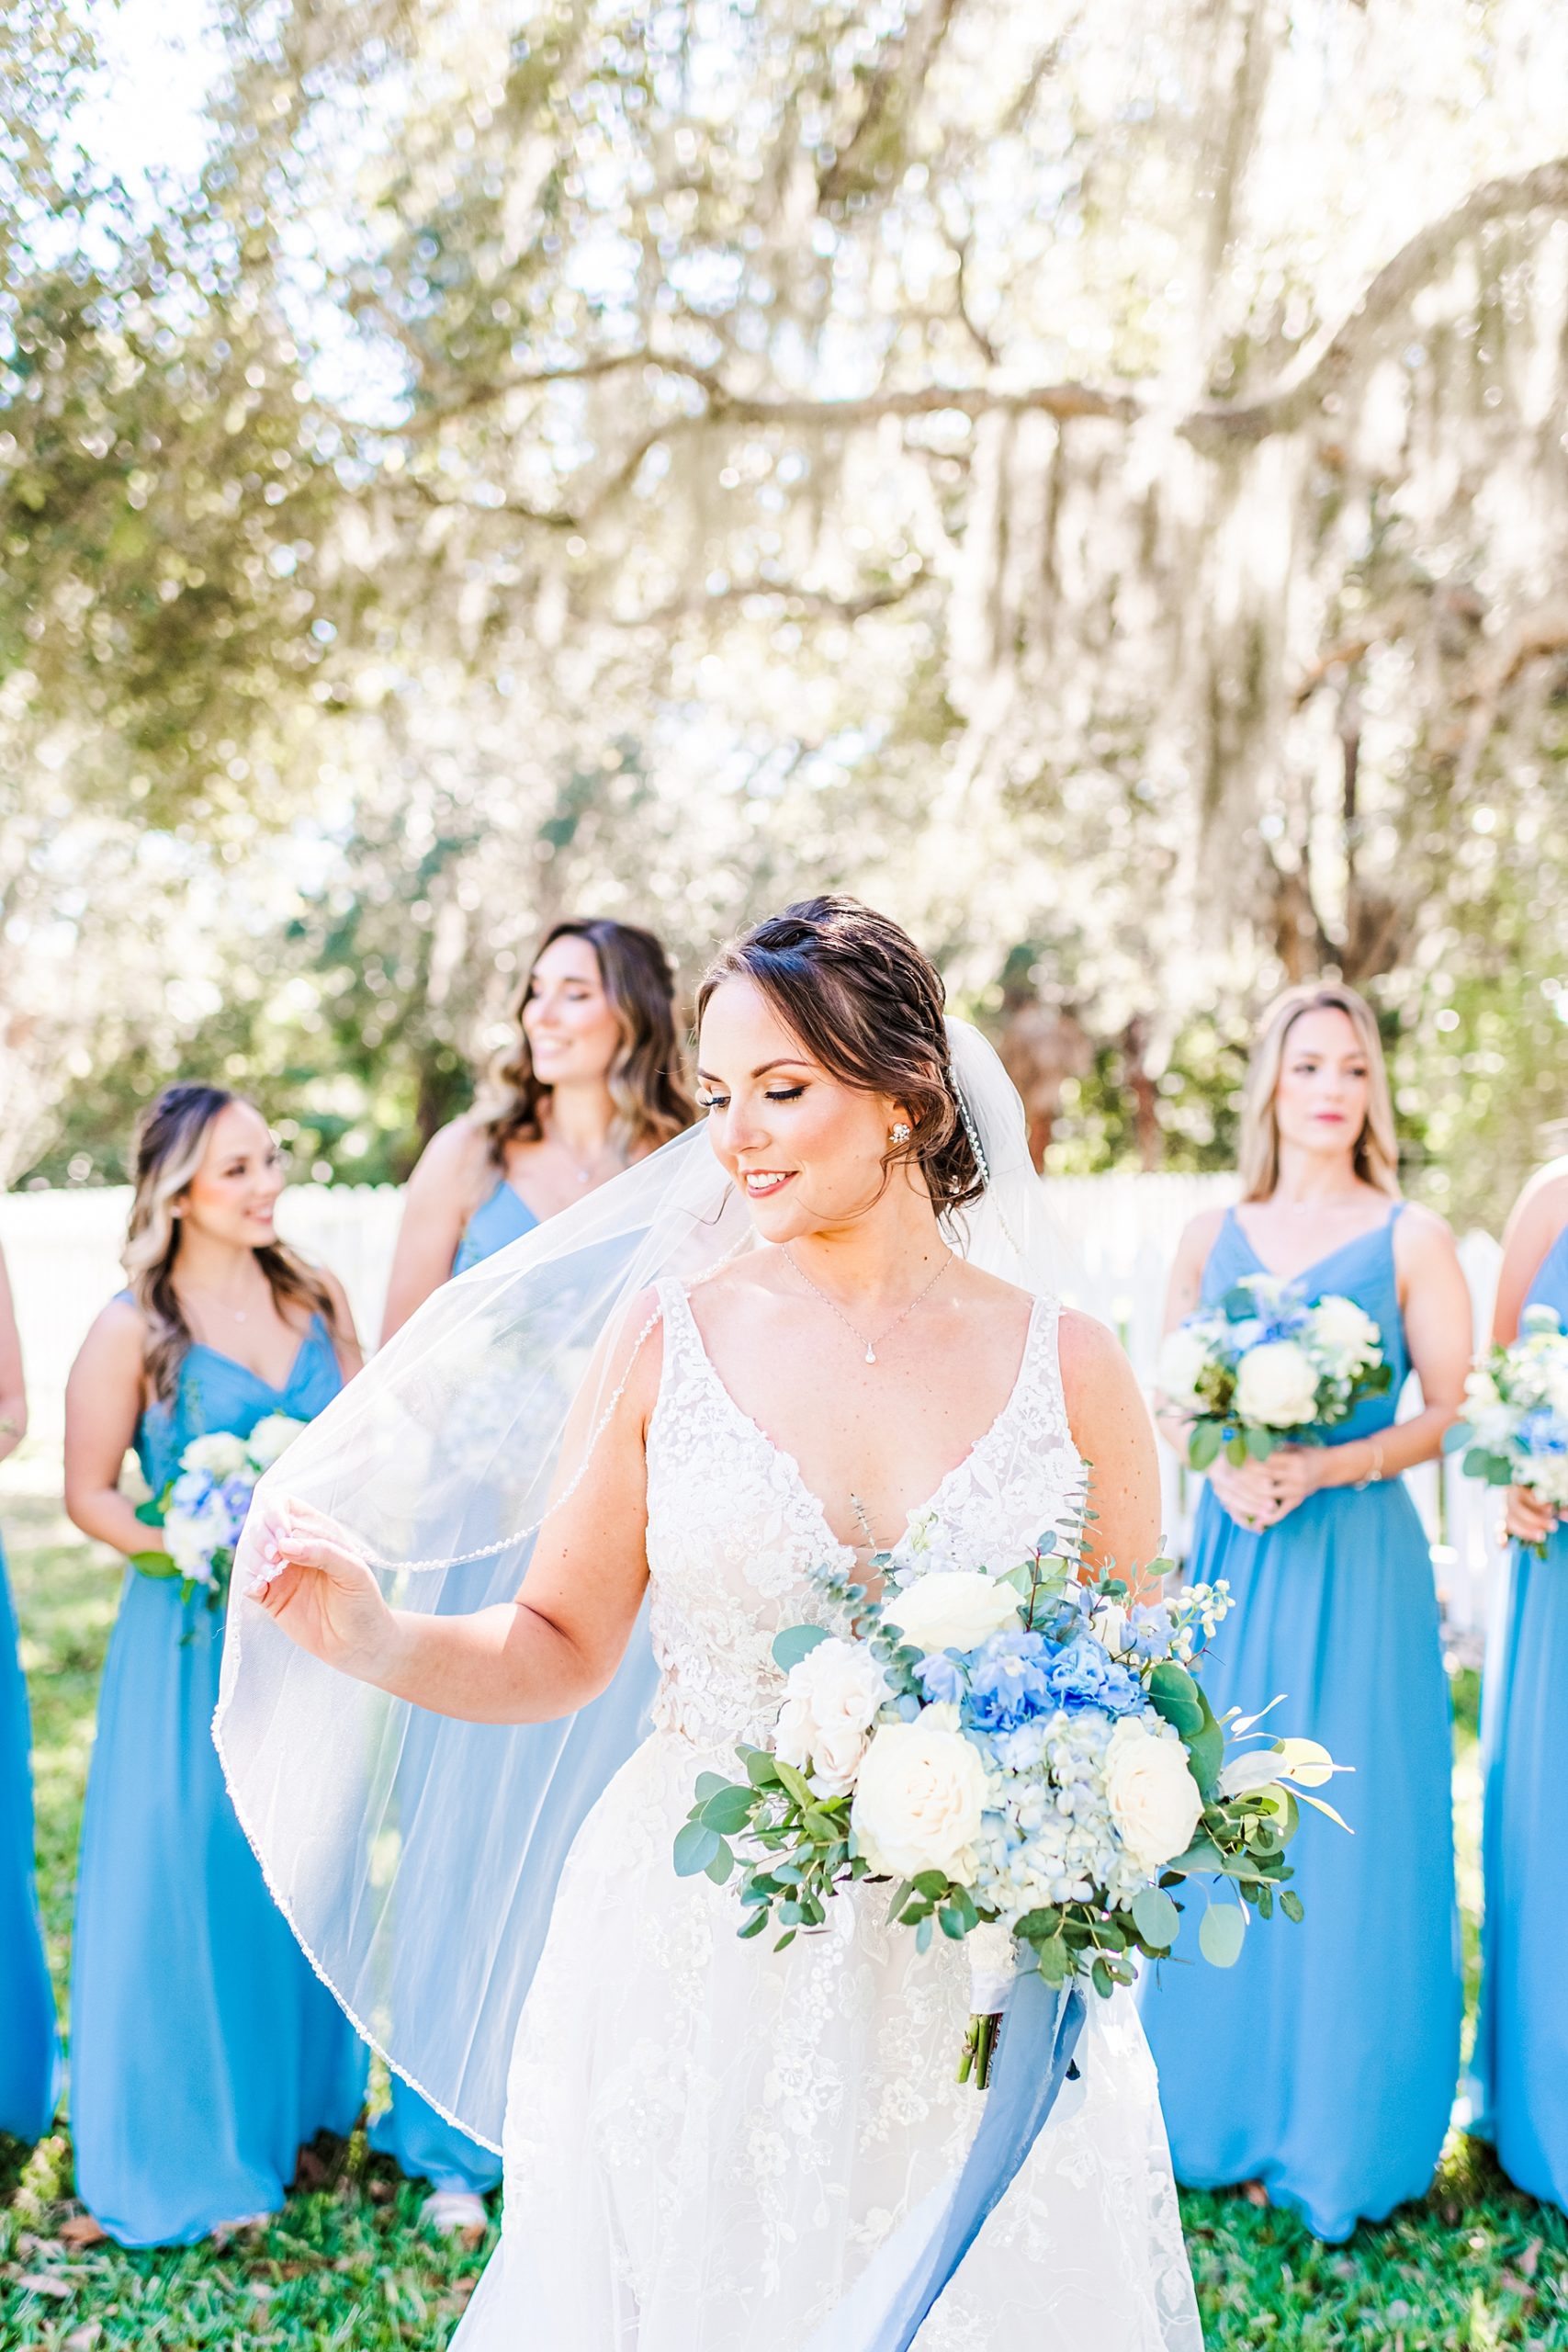 Wedding Photographer in Florida | The Delamater House Wedding | Chynna Pacheco Photography-216